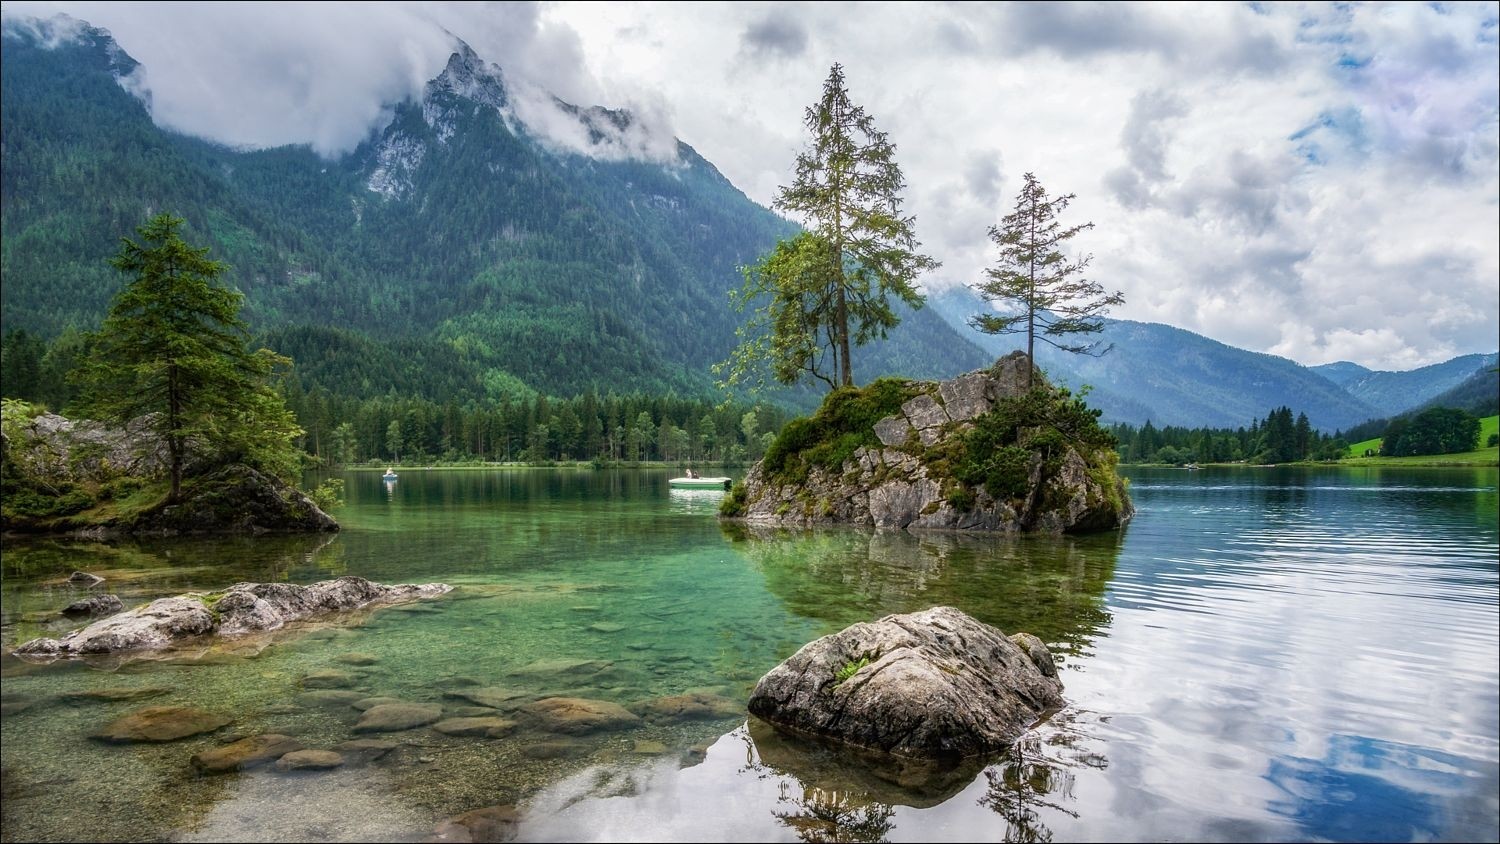 General 1500x844 photography landscape nature lake mountains clouds rocks forest pine trees boat spring Germany